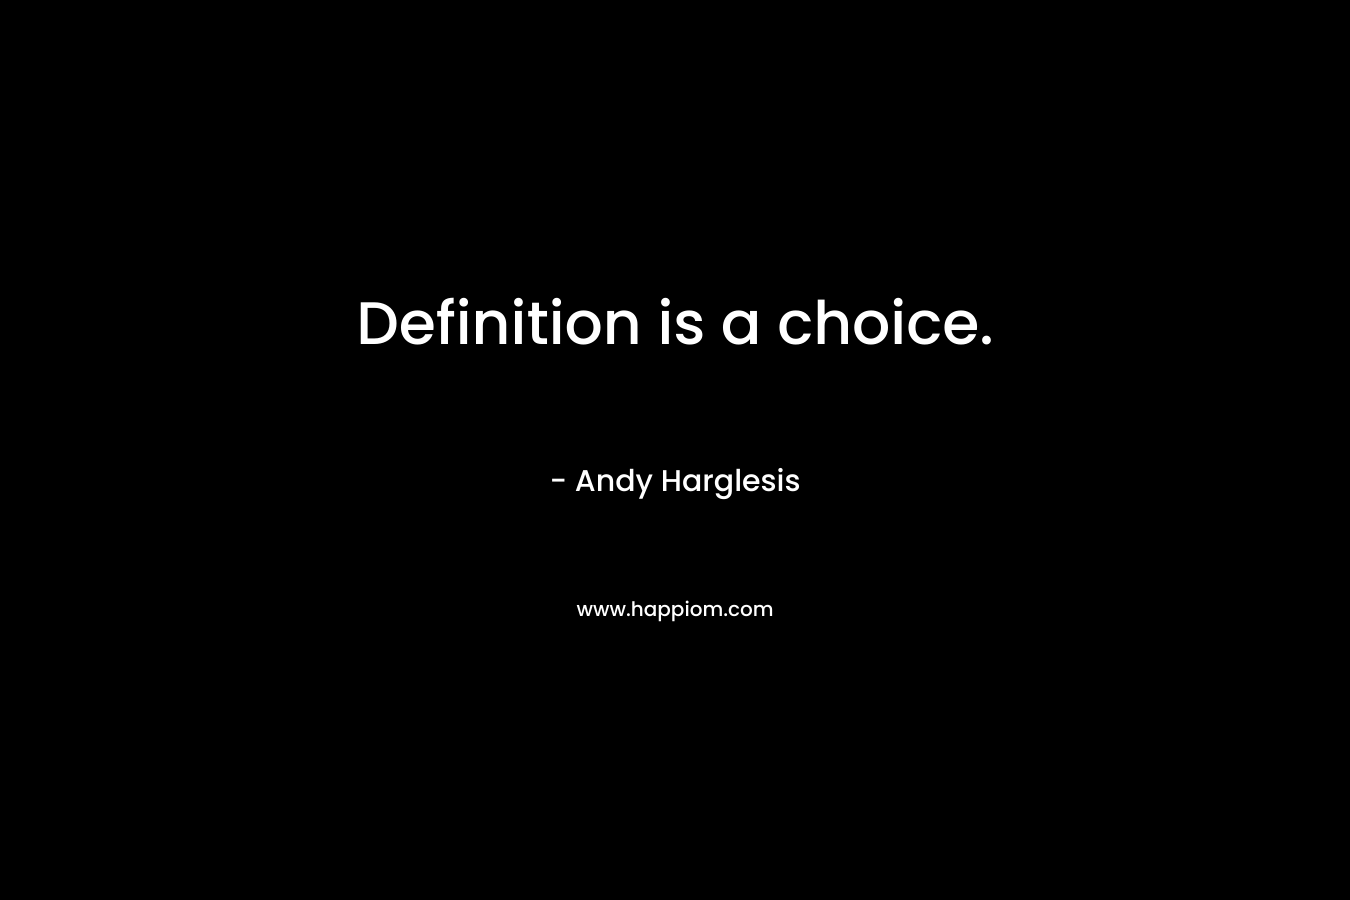 Definition is a choice.